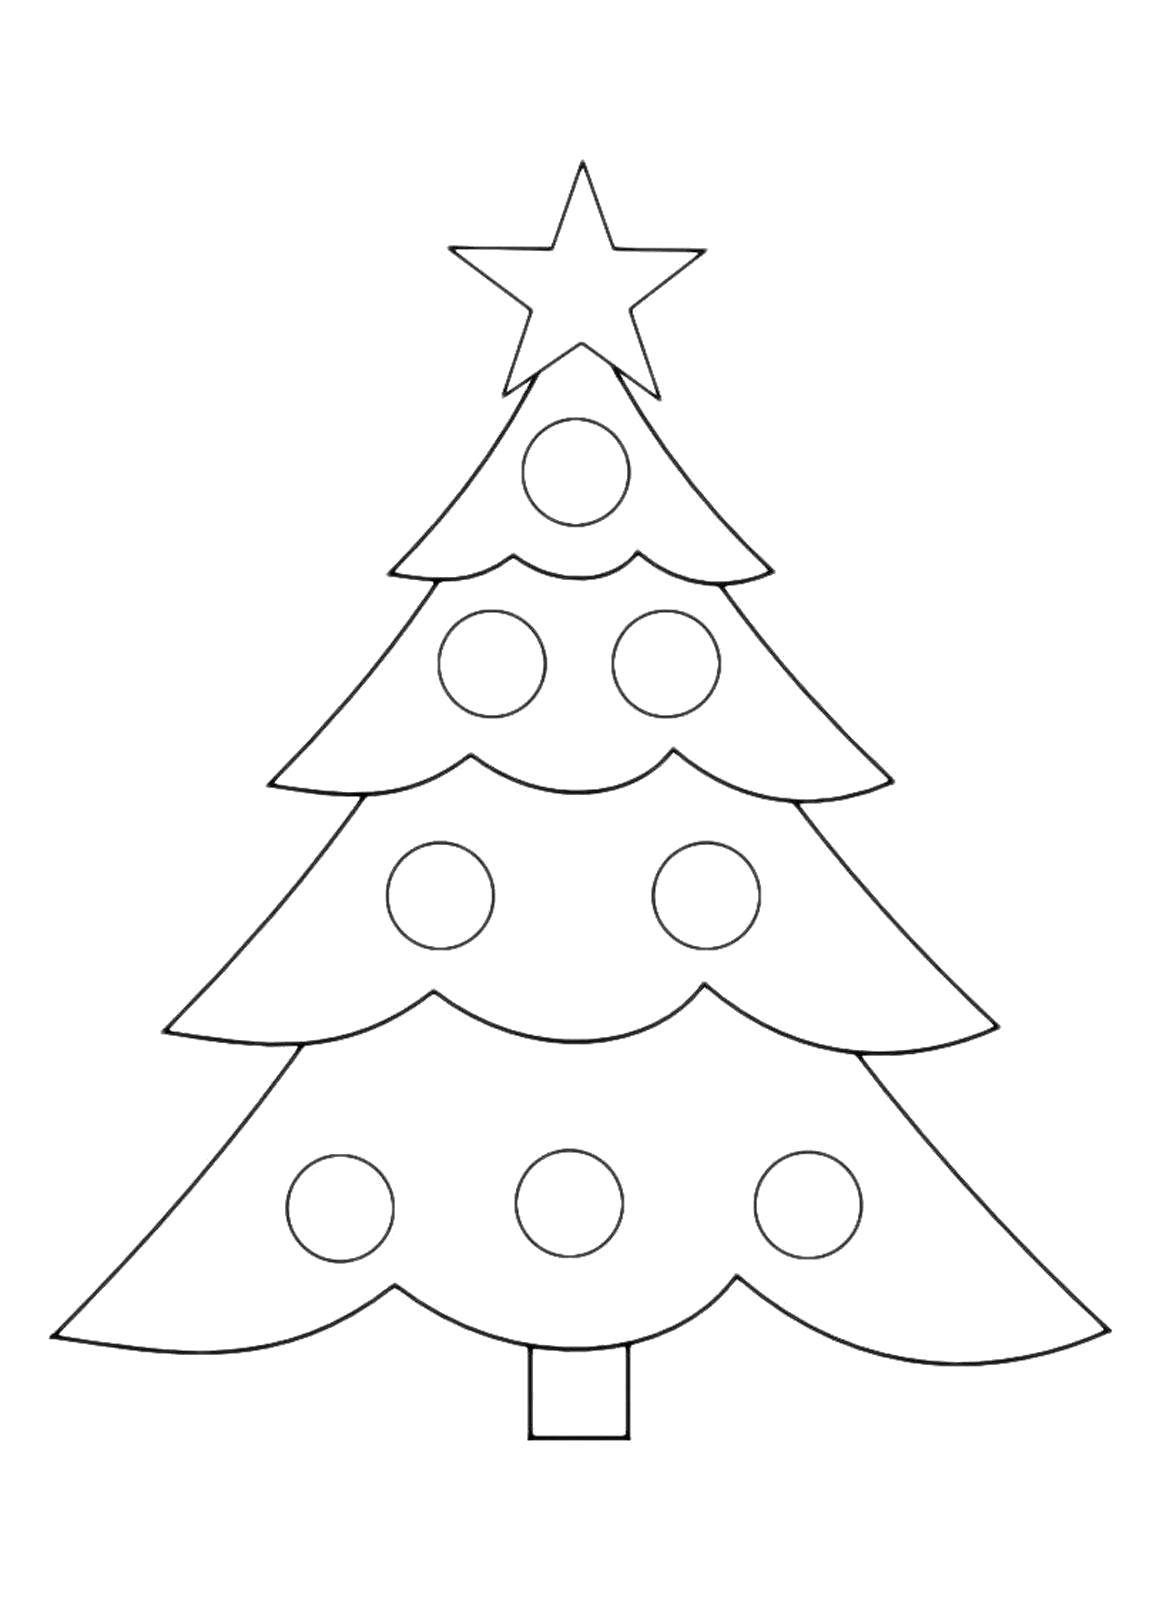 Coloring Christmas tree with toys. Category simple coloring. Tags:  New Year, tree, gifts, toys.